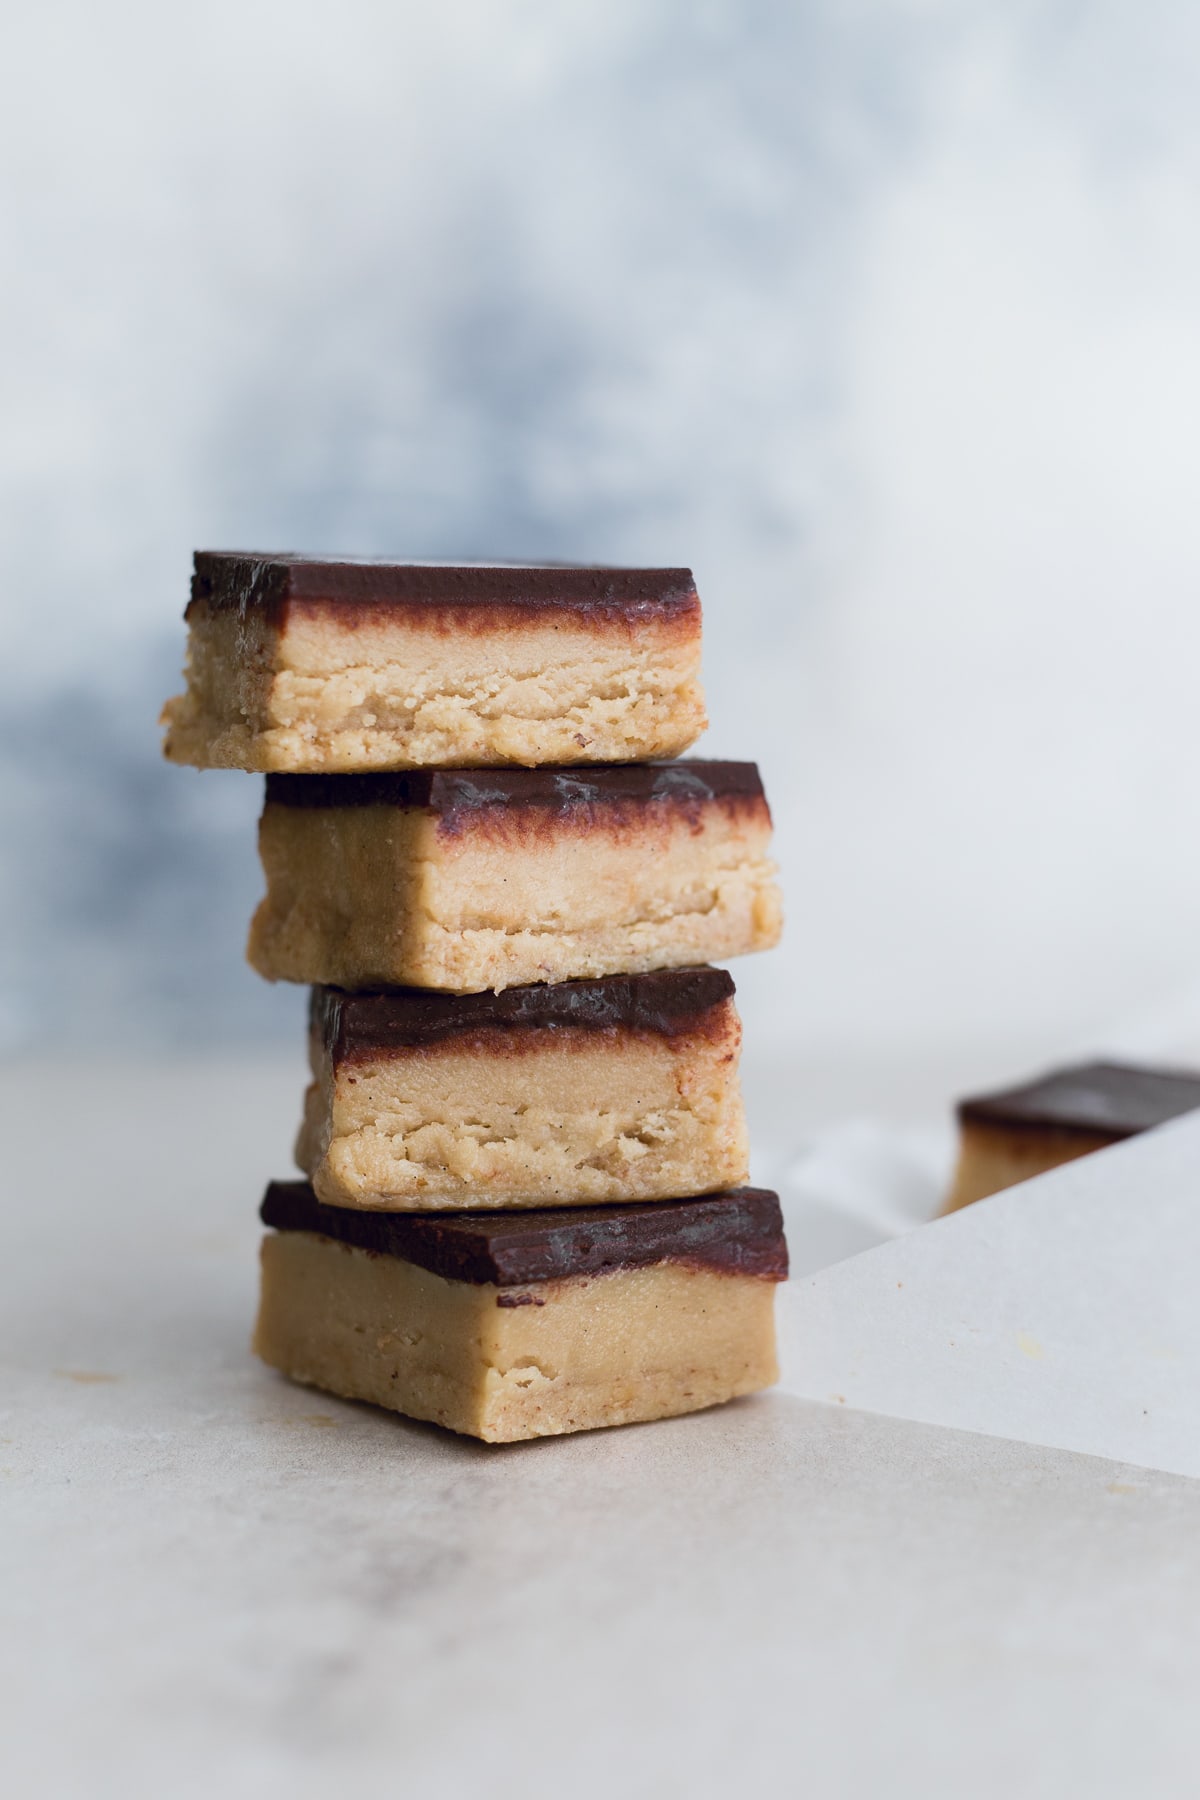 A delicious Raw Vegan Tahini Caramel Slice topped with Chocolate - easy to make, full of wholesome ingredients and completely DATE FREE. #simple #raw #vegan #chocolate #caramel #tahini #caramelslice #datefree #healthy #rawfood #desserts #plantbased